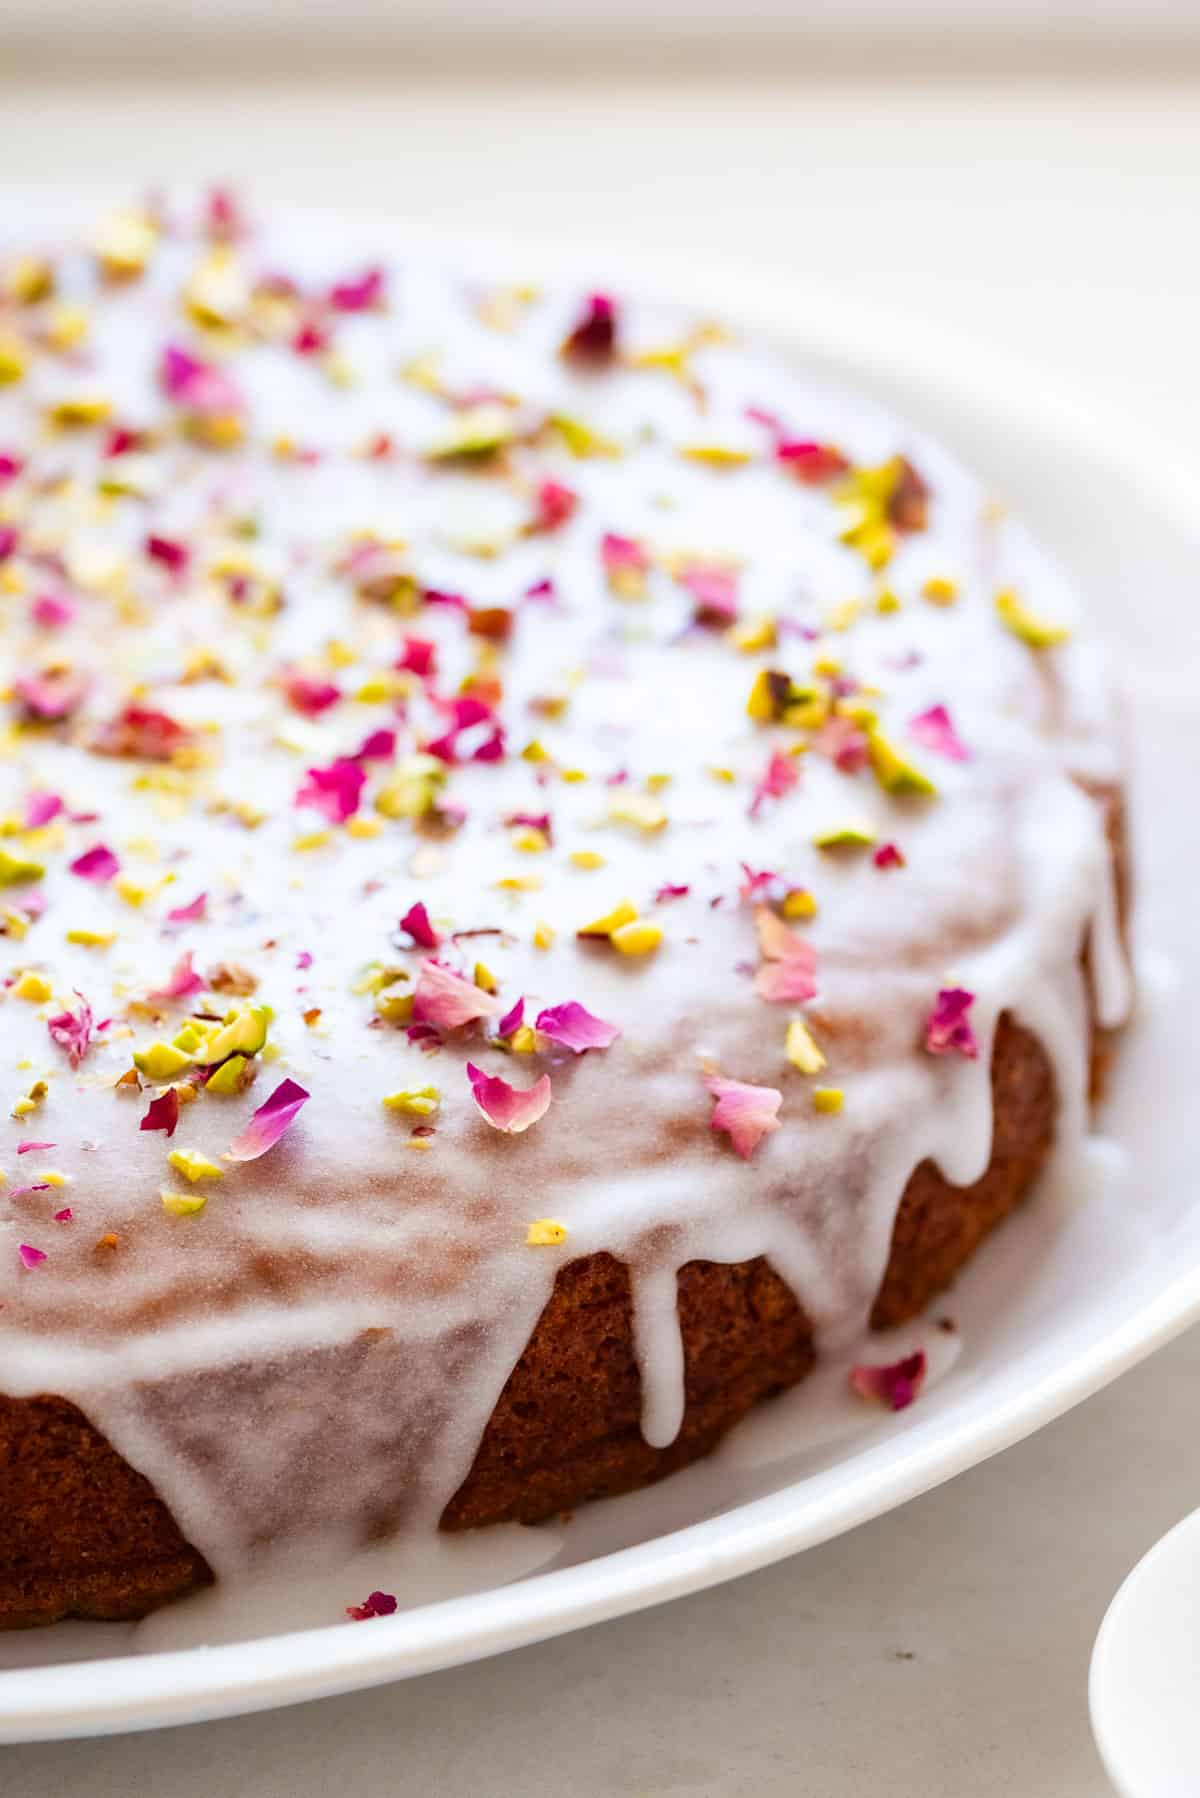 A close up shot of Persian love cake with rose petals and pistachios sprinkled over top.